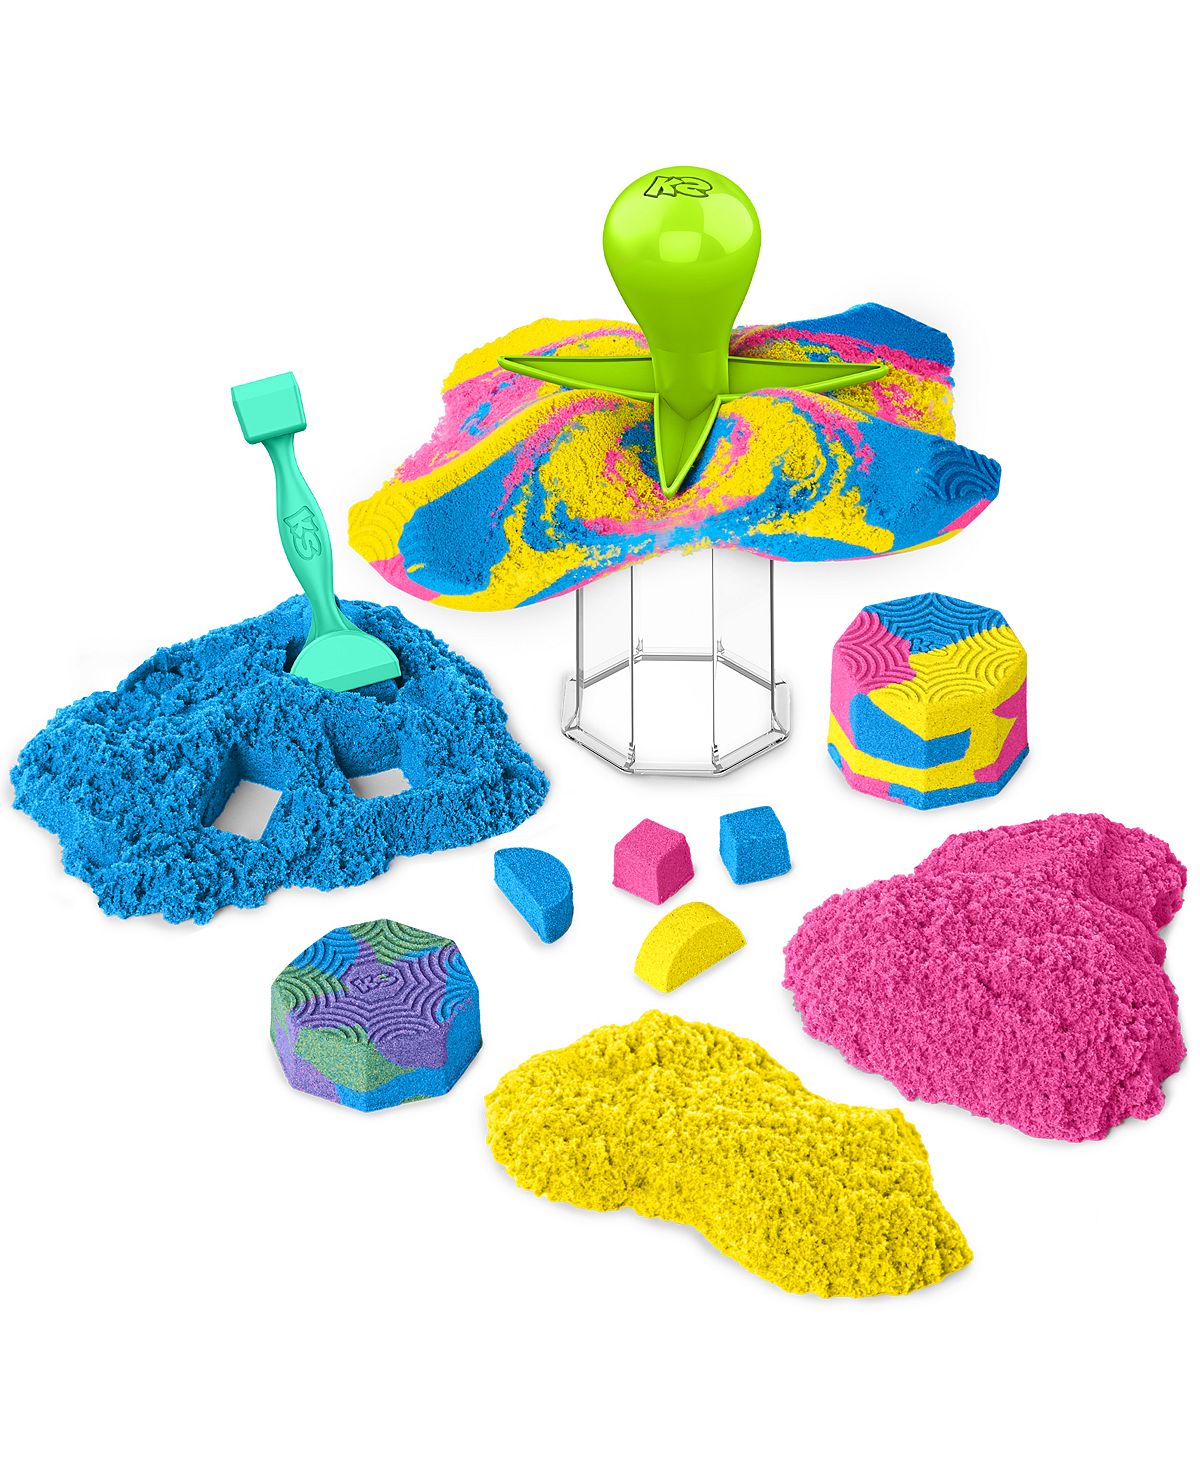 Kinetic Sand Squish N' Create Playset - Blue, Yellow, Pink